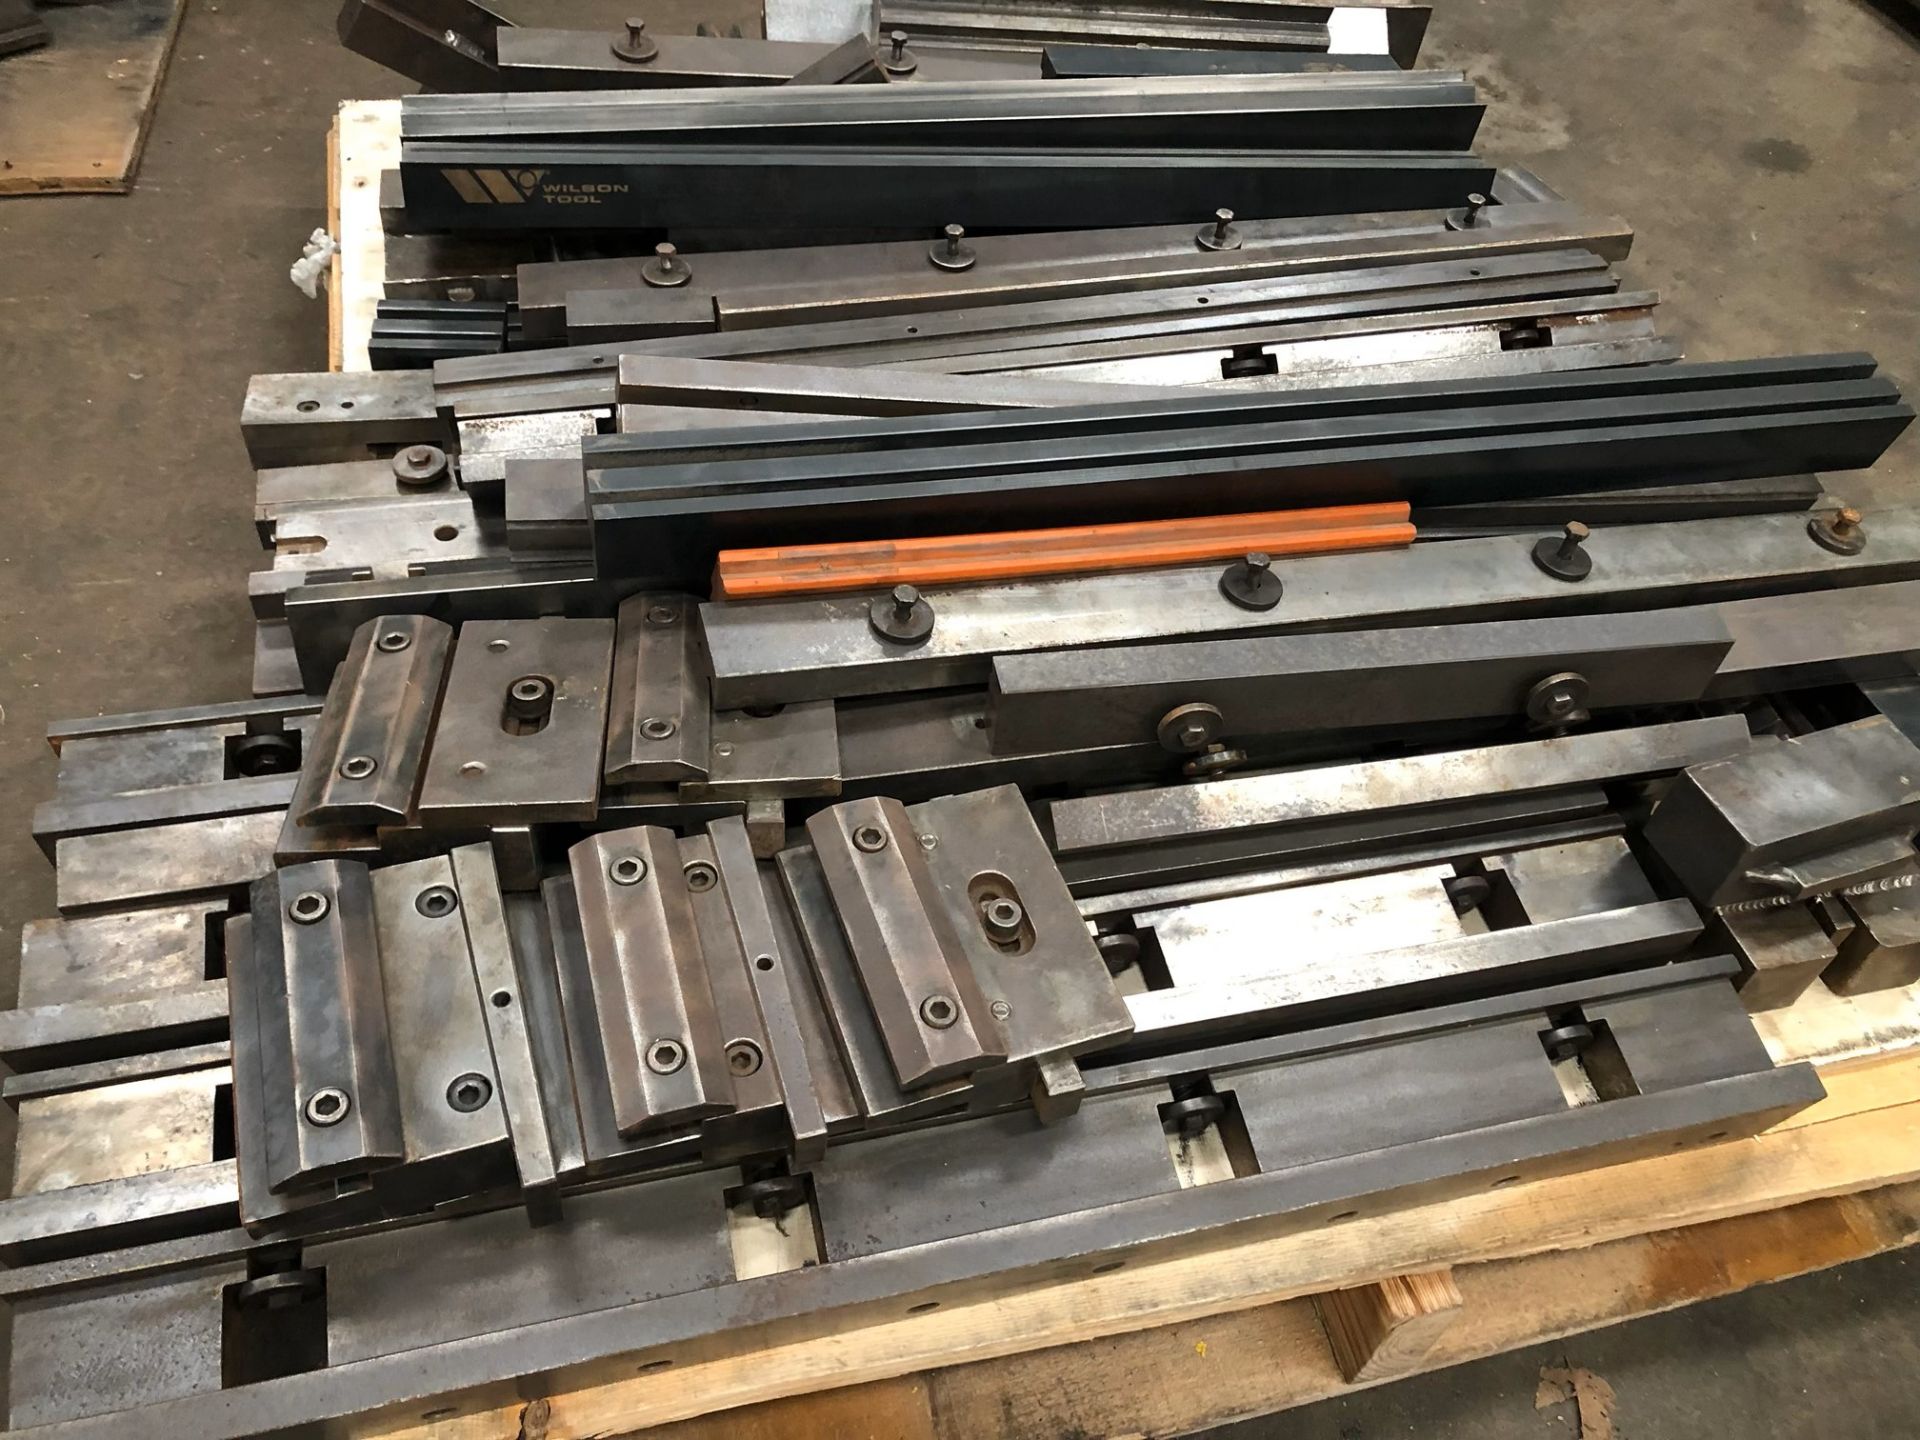 LOT OF PRESS BRAKE DIES, AMADA (Located at: Pitts by JJ, 3426 Hopper Road, Houston, TX 77093) - Image 5 of 5